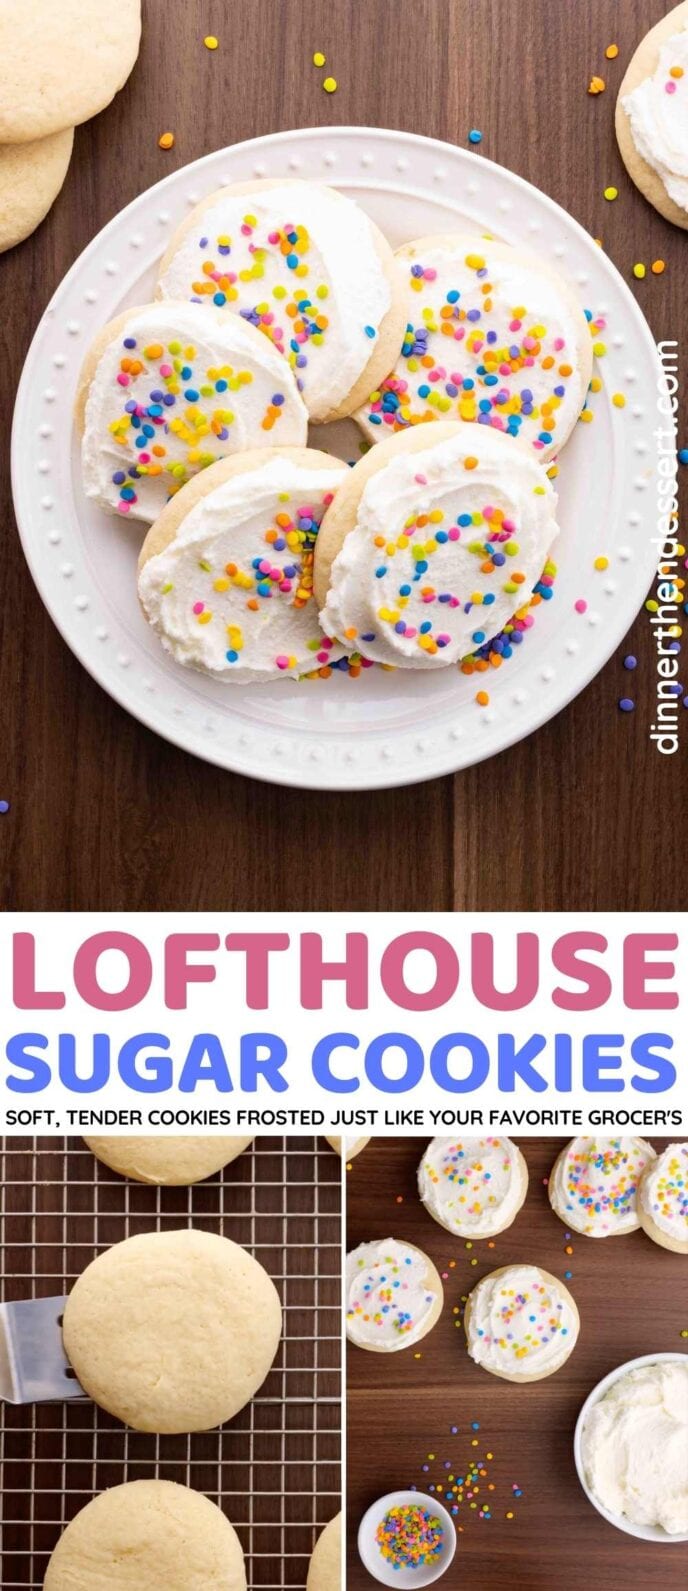 Lofthouse Sugar Cookies Collage